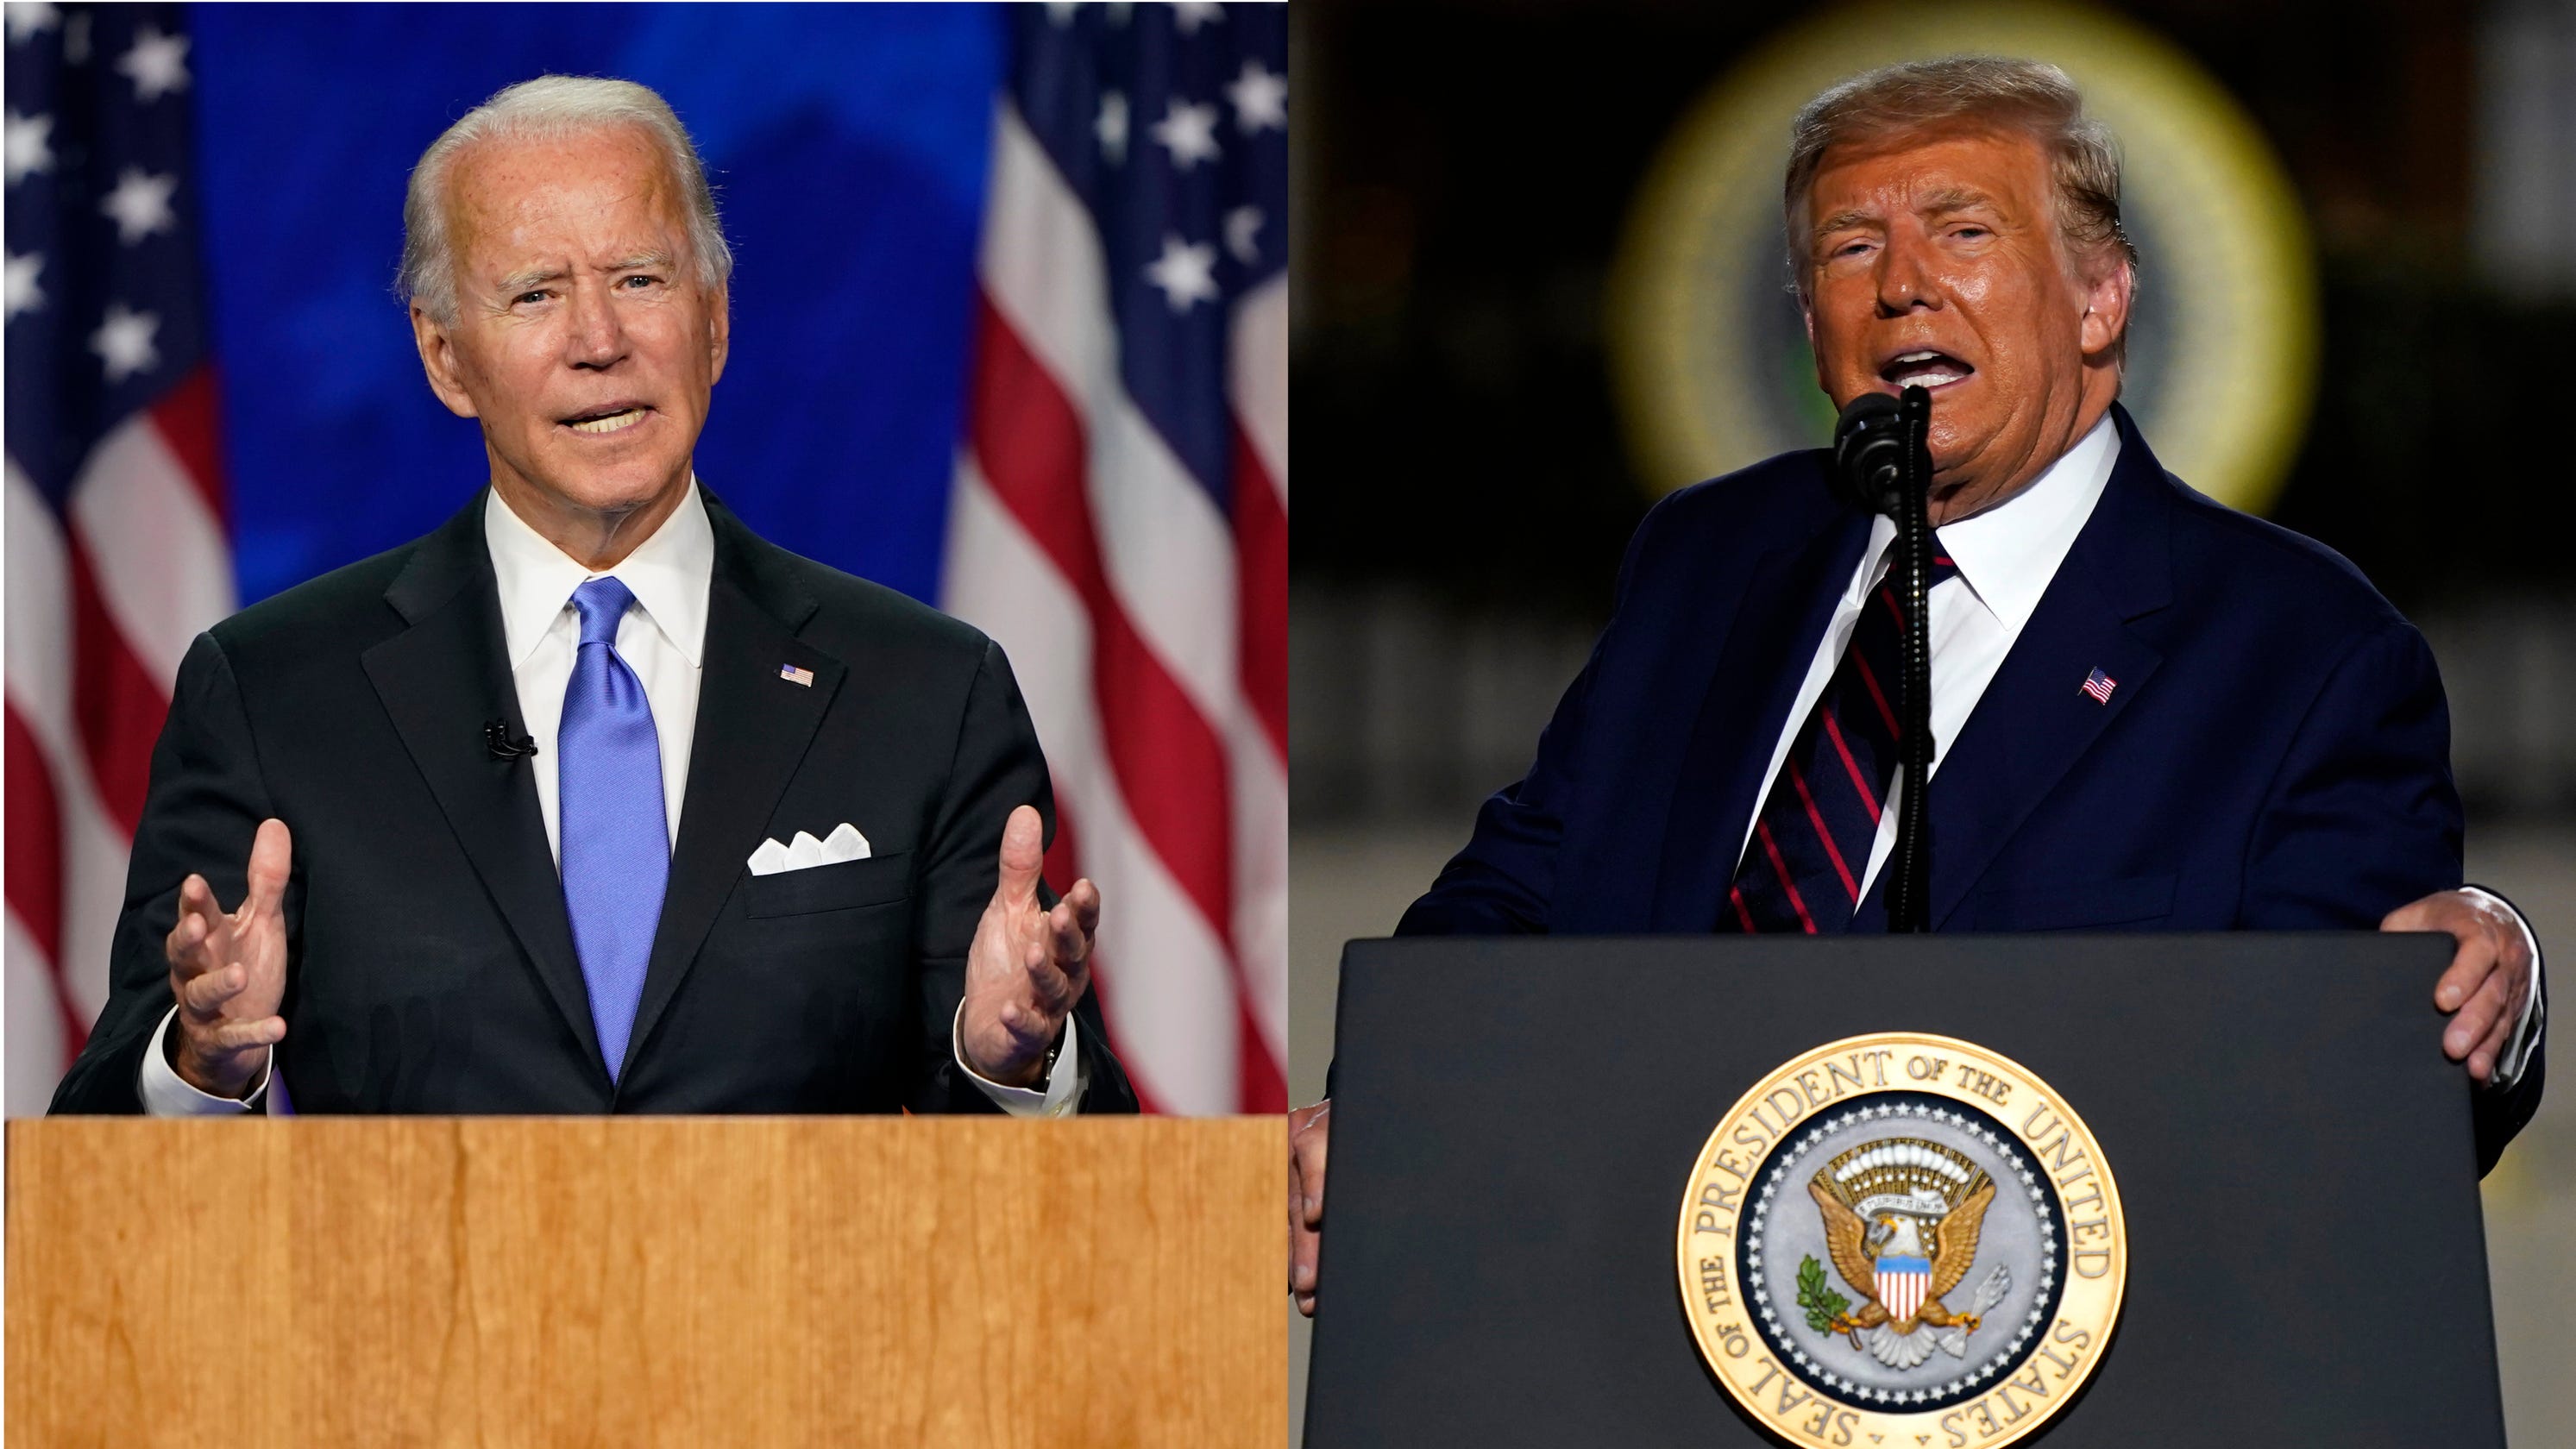 Exclusive: The conventions over, Joe Biden leads Donald Trump by a narrower 50%-43% in USA thumbnail